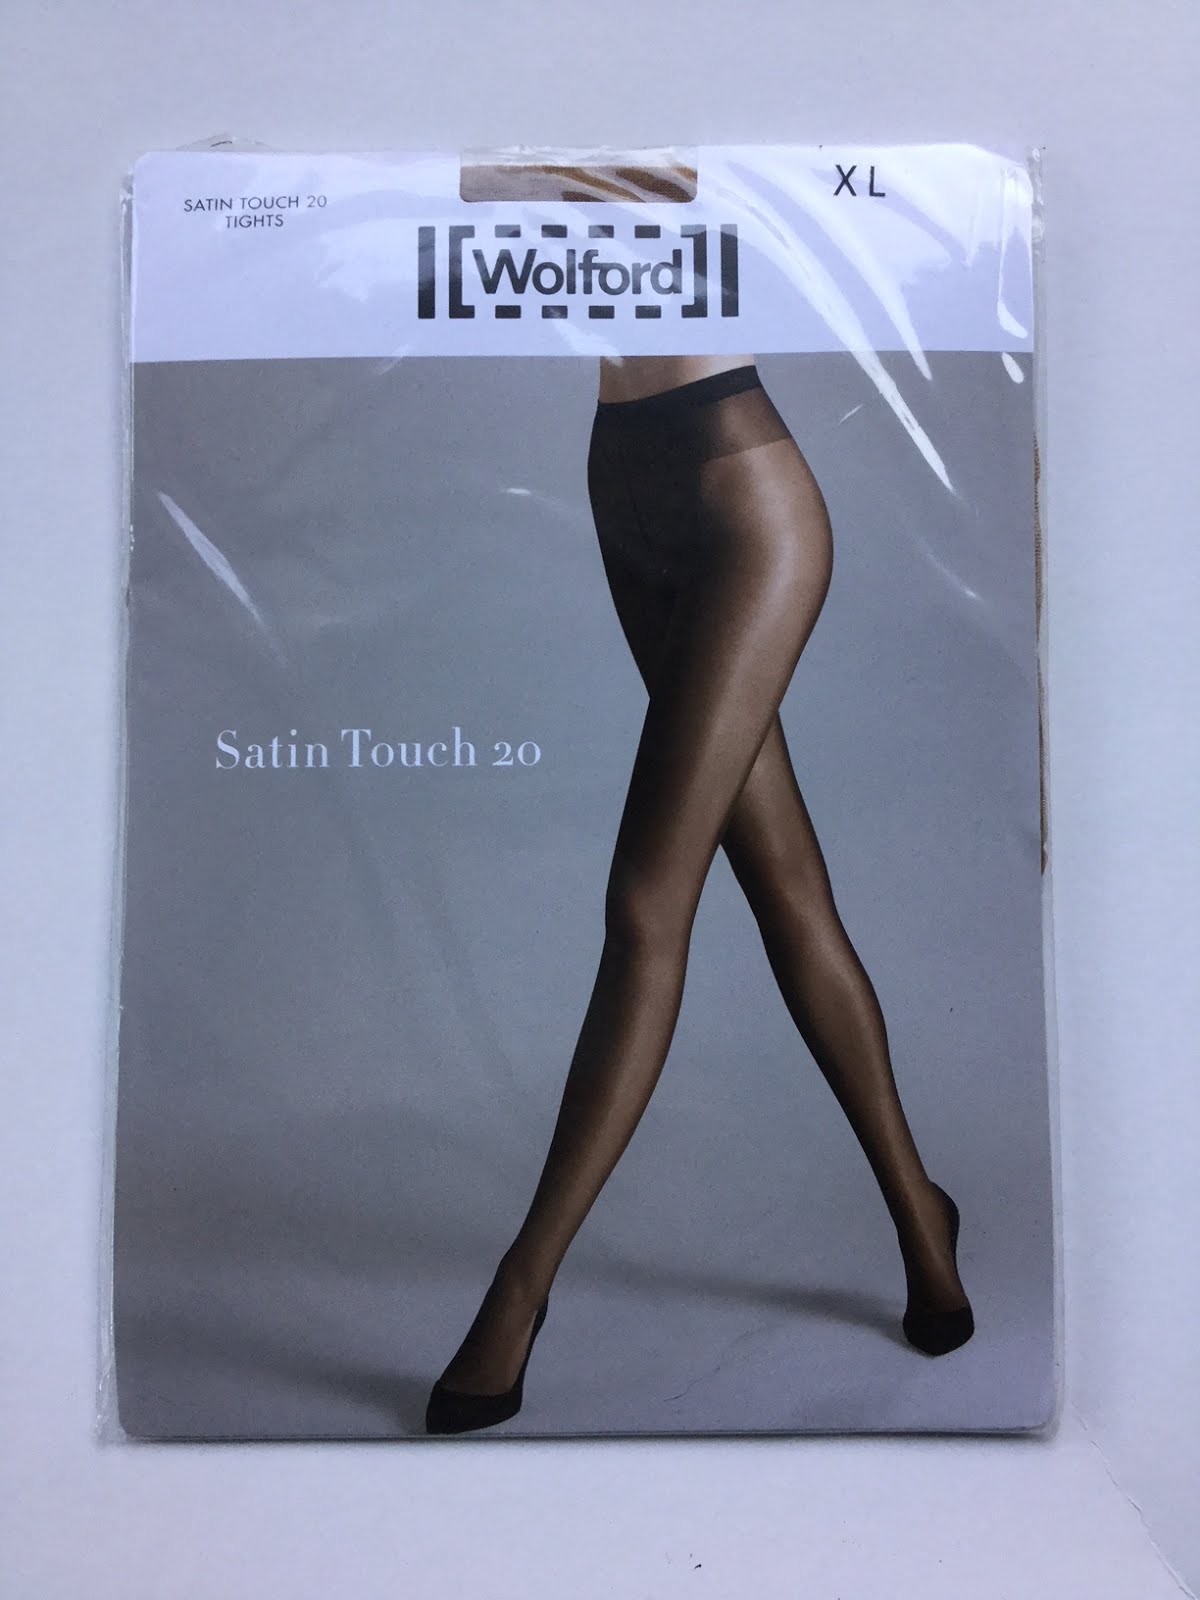 Hosiery For Men: Reviewed: Wolford Satin Touch 20 Tights